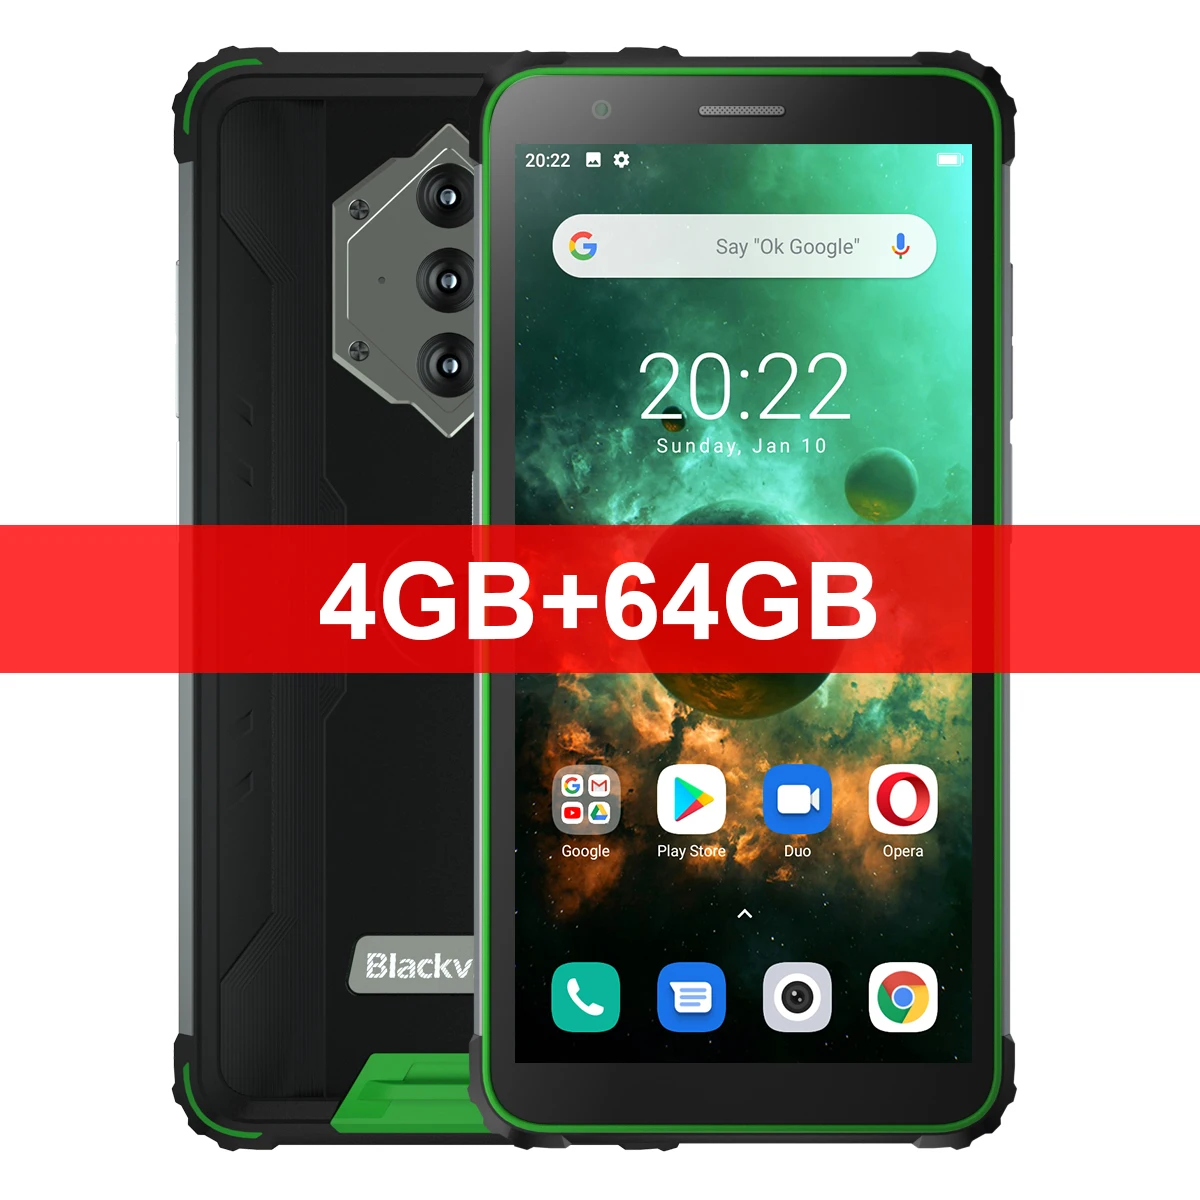 Blackview BV6600 4GB RAM 64GB ROM Smartphone 8580mAh Battery Helio A25 Octa Core NFC 16MP Camera 5.7" Display IP68 Waterproof cell phone with dual sim Android Phones